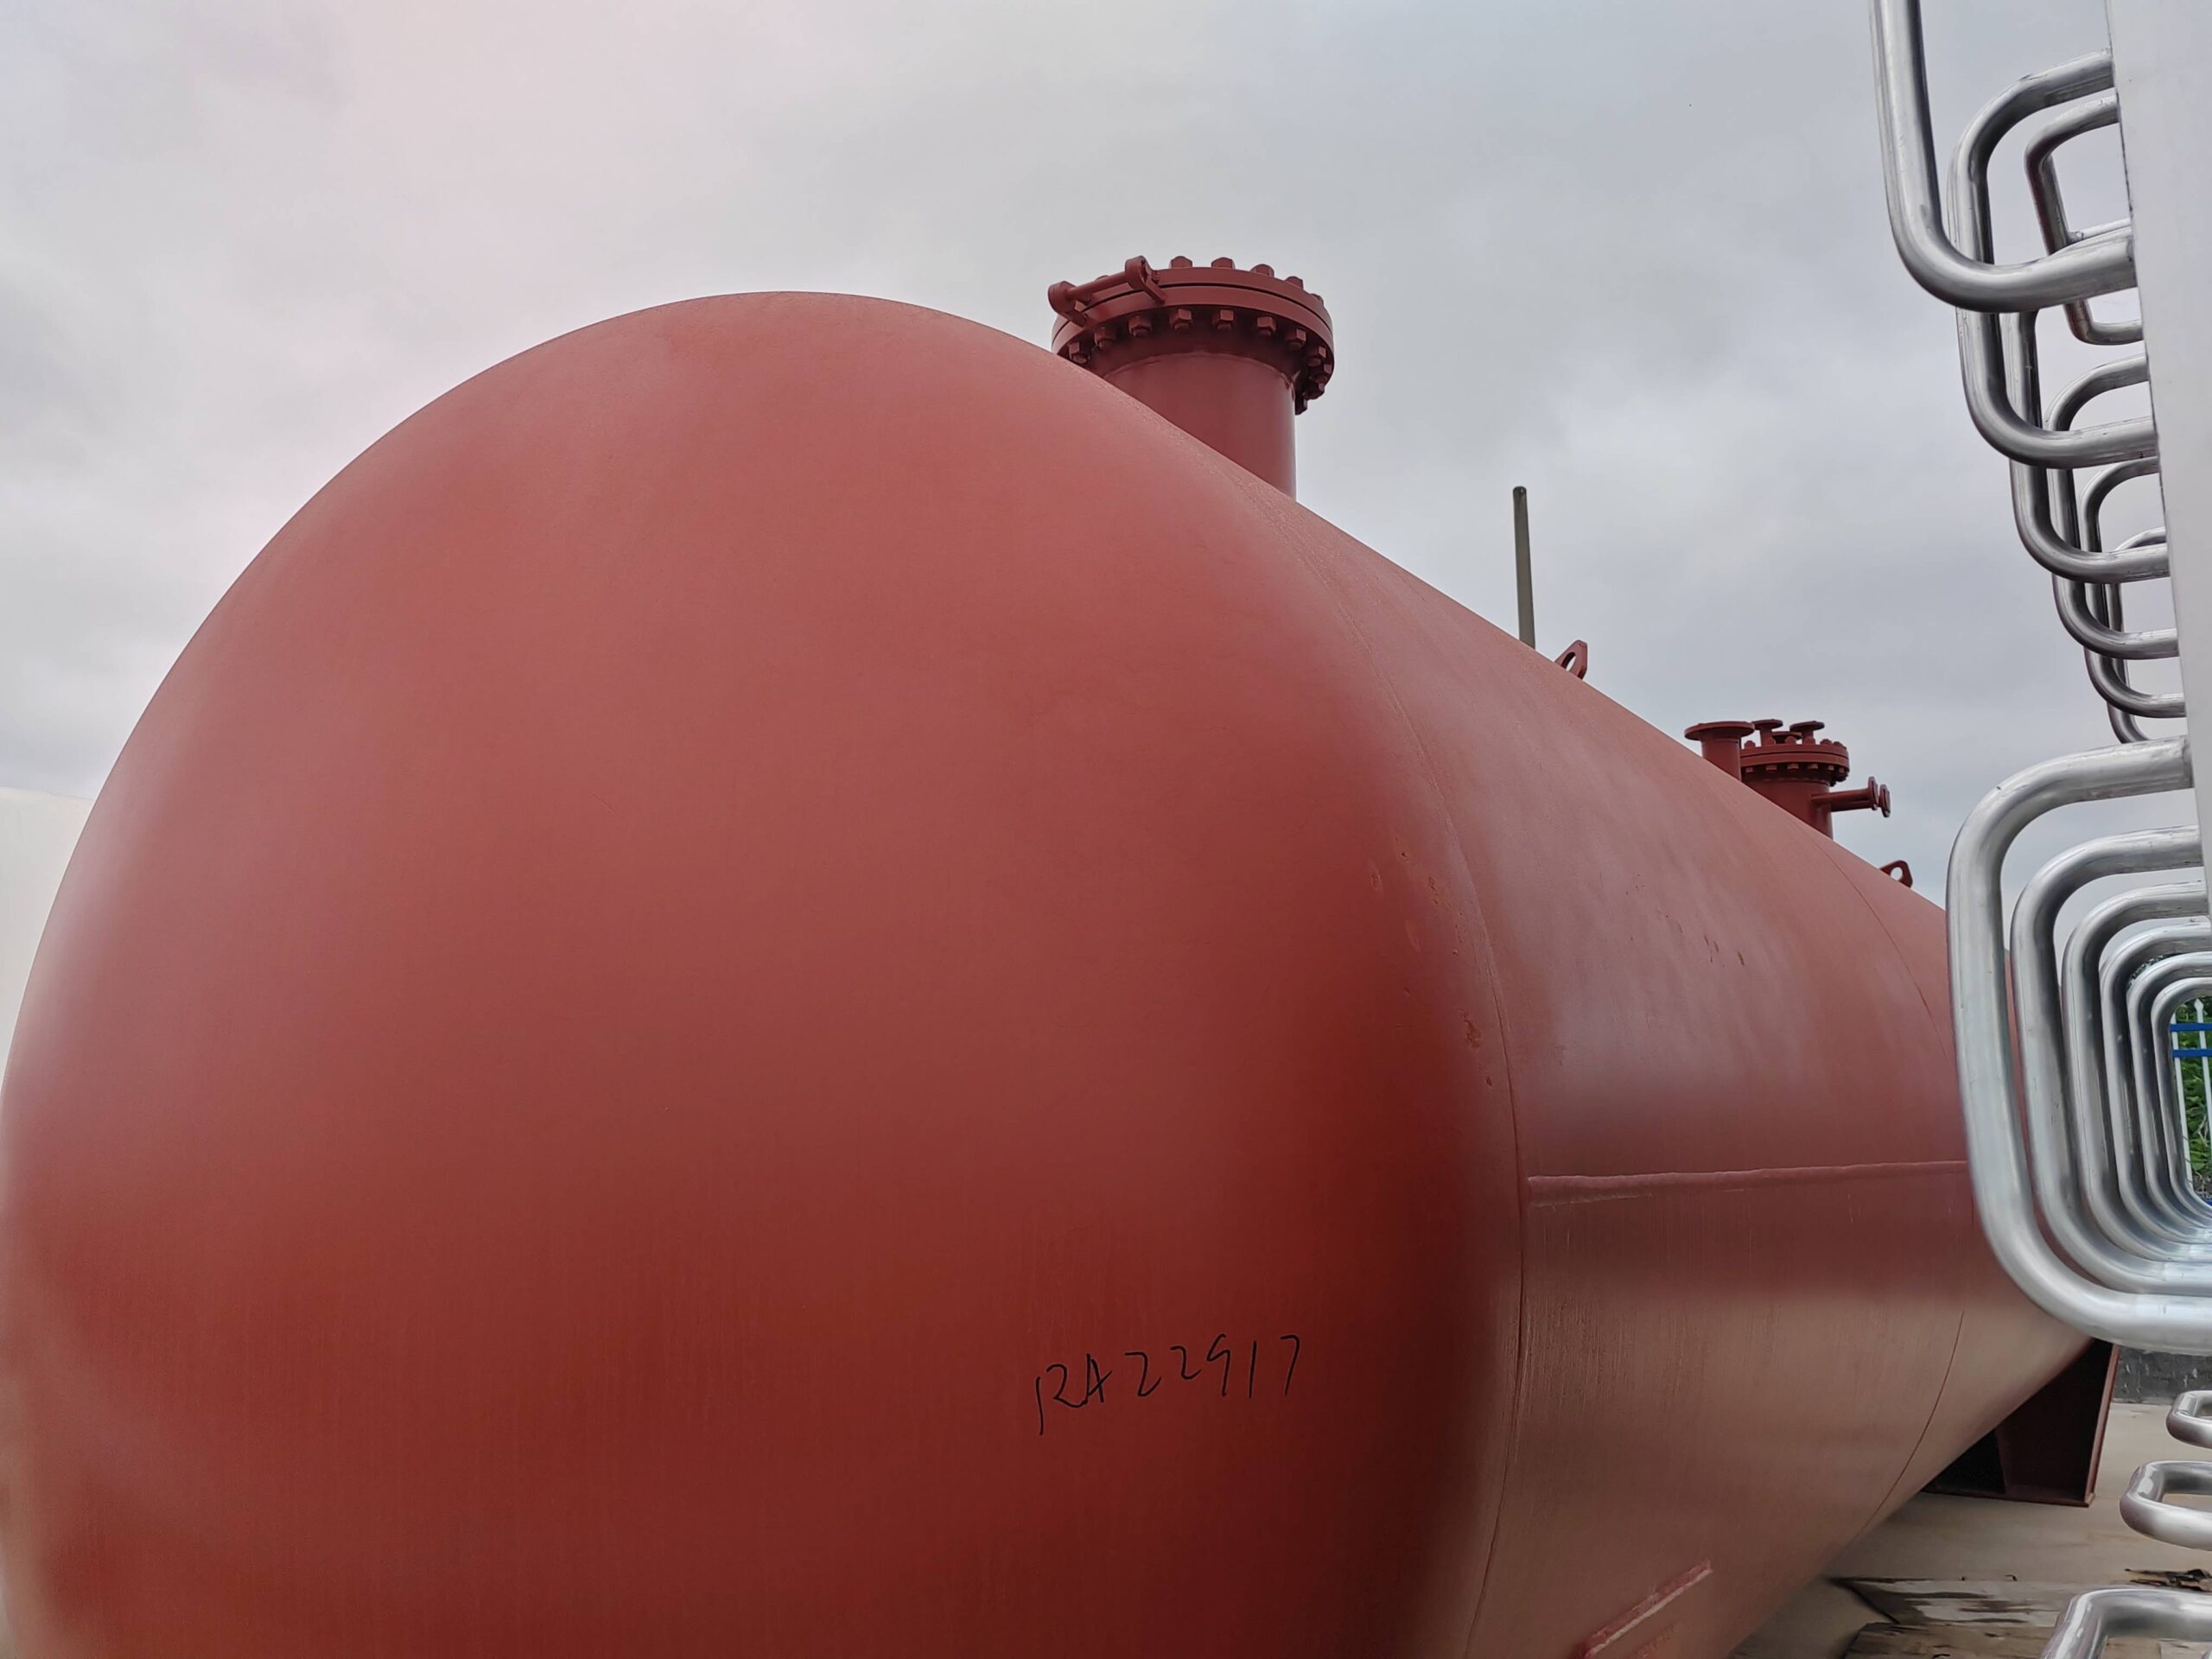 safety use of the LPG propane tank